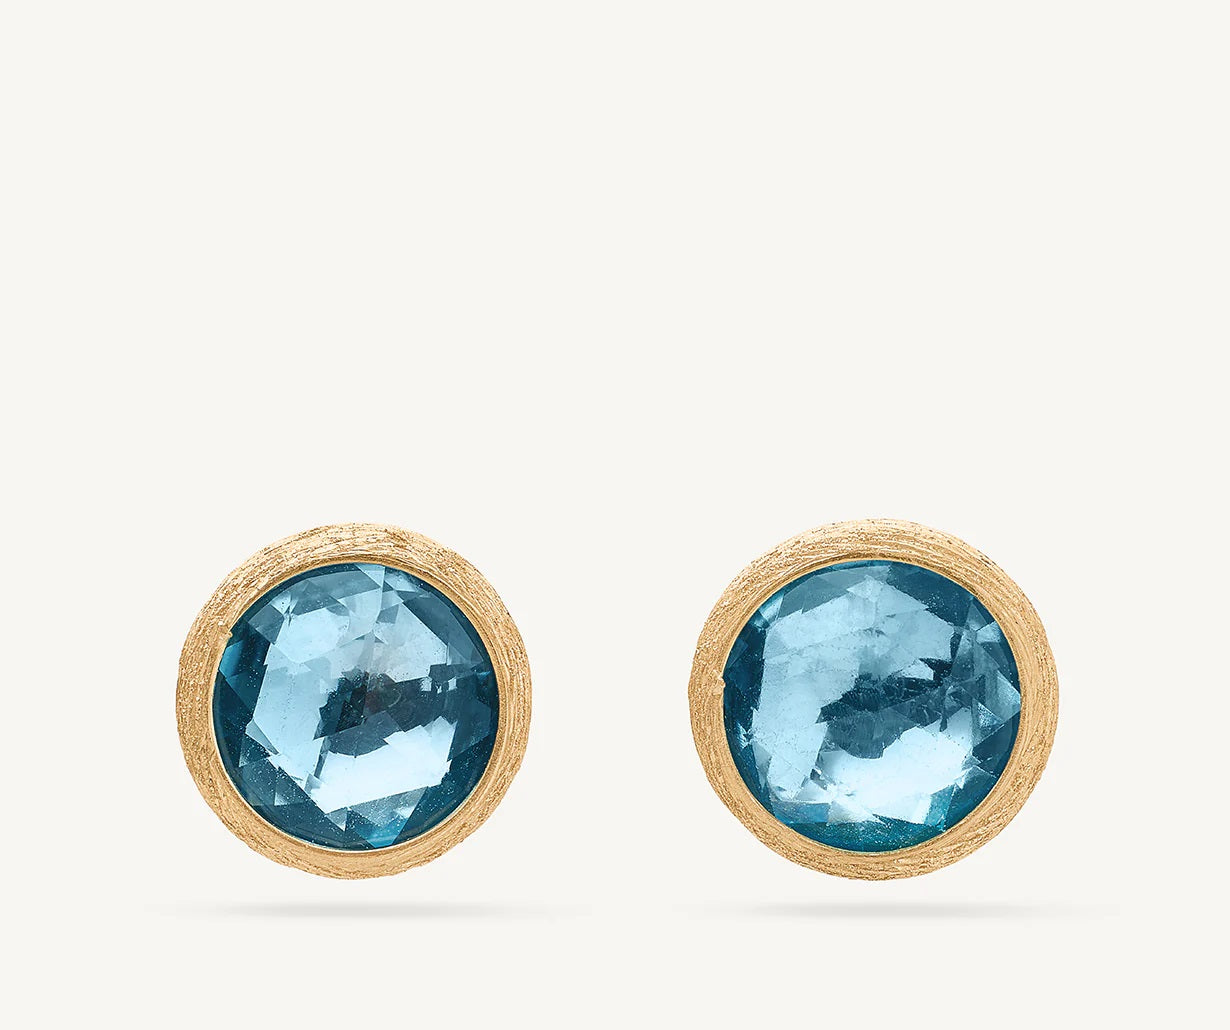 18K GOLD AND BLUE TOPAZ EARRINGS FROM THE JAIPUR COLLECTION